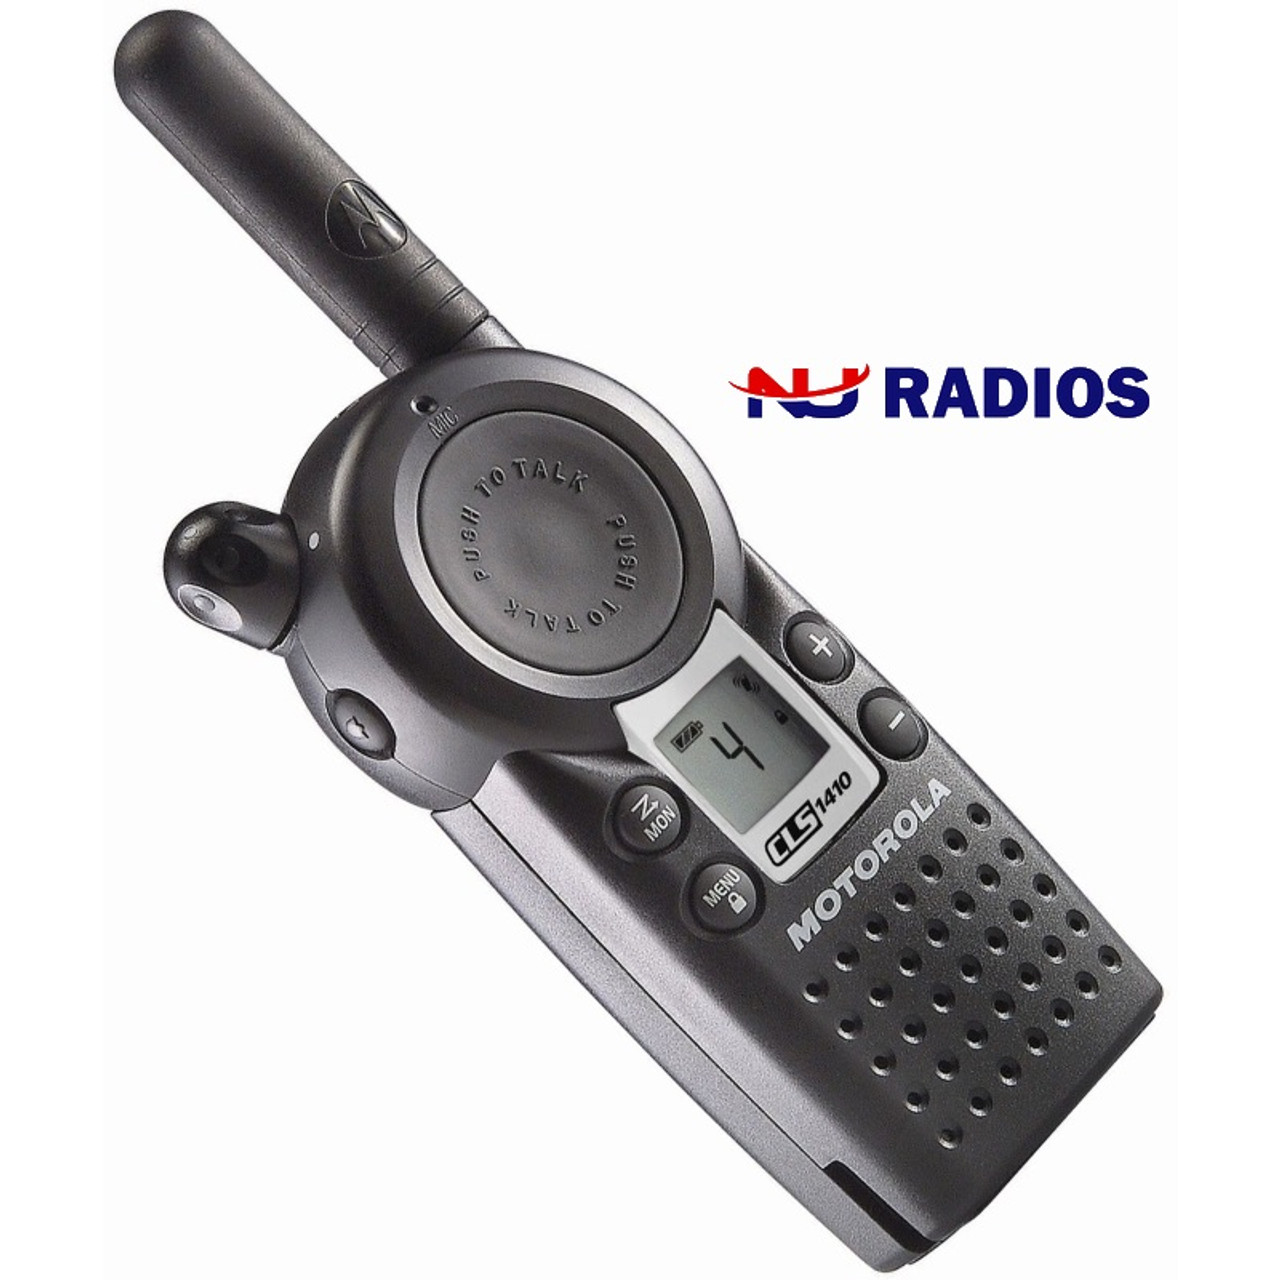 Motorola CLS1410 6-Pack with VibraCall is for business. These UHF Two Way  Radios have channels. Walkie talkies that include holsters, batteries,  chargers and belt clips.